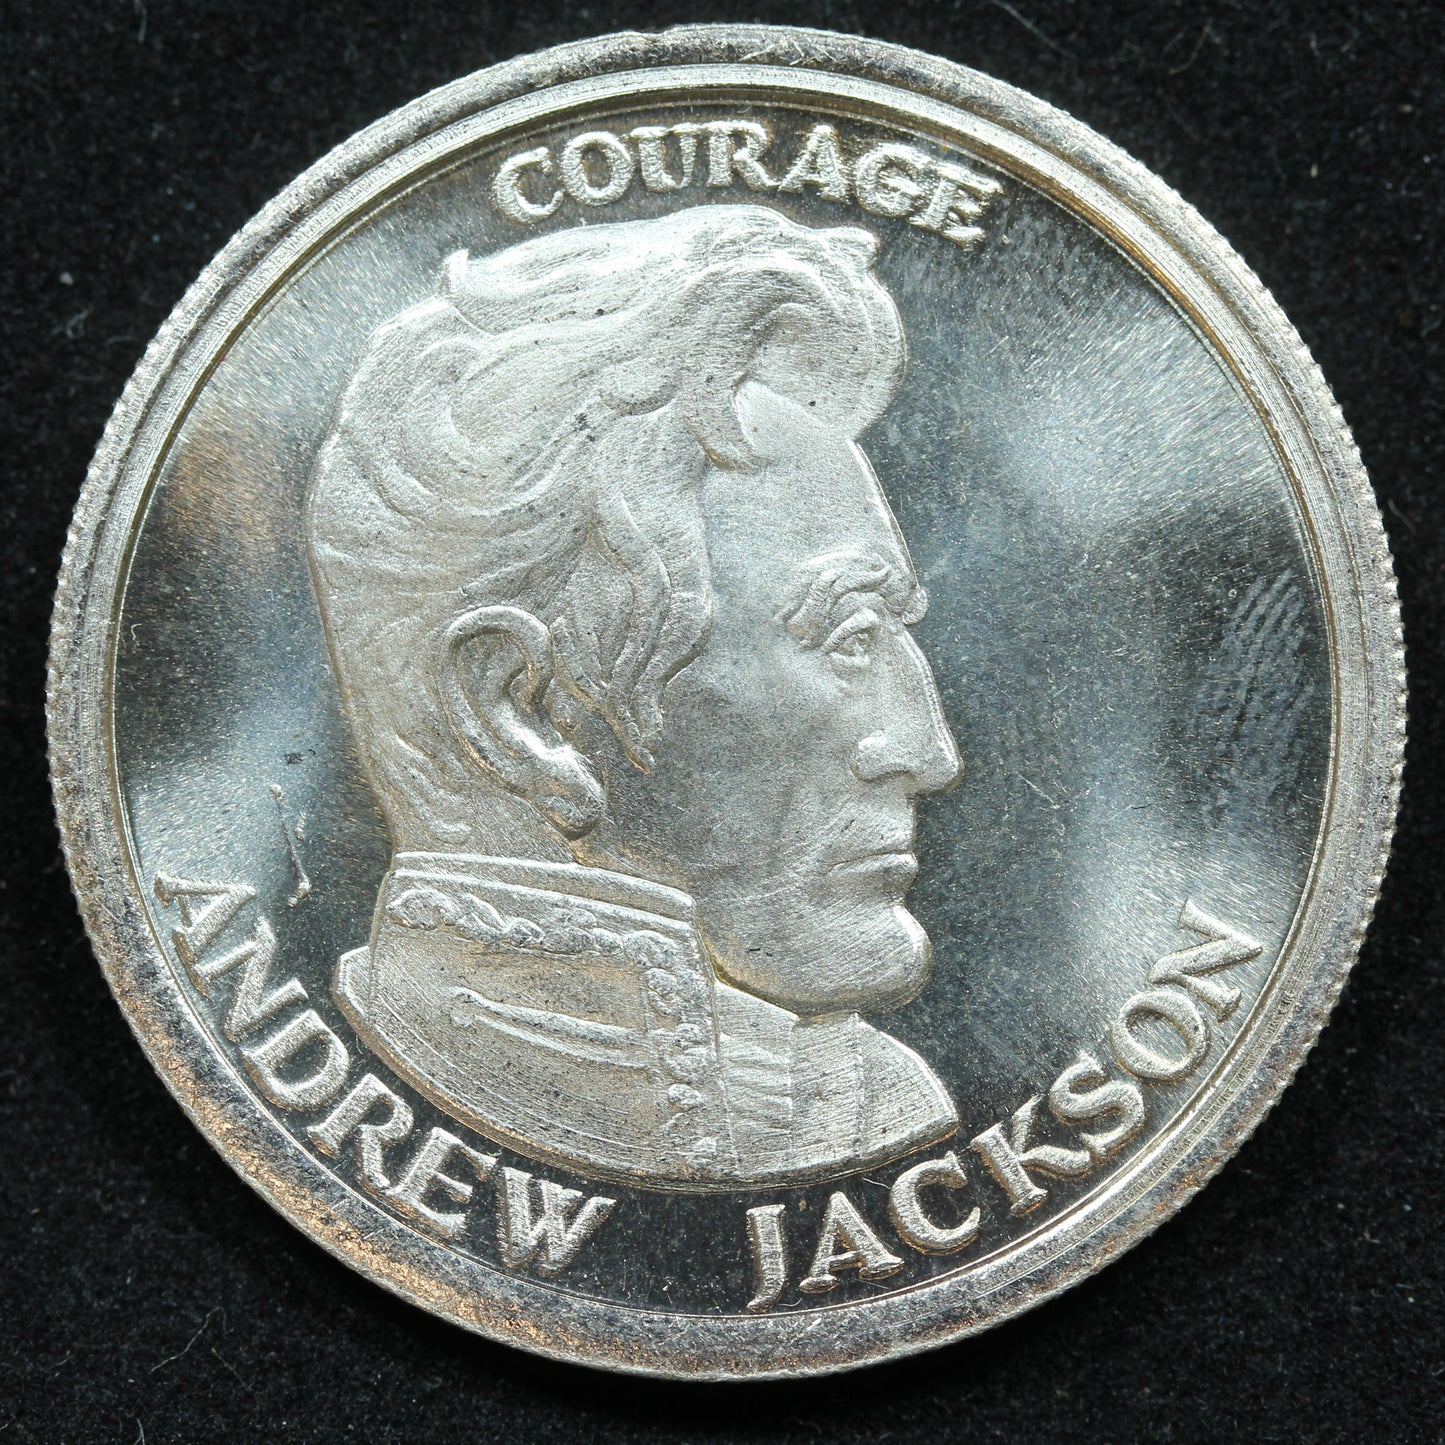 1978 Liberty Lobby 240 grains .999 Silver Medallion Andrew Jackson Courage Medal